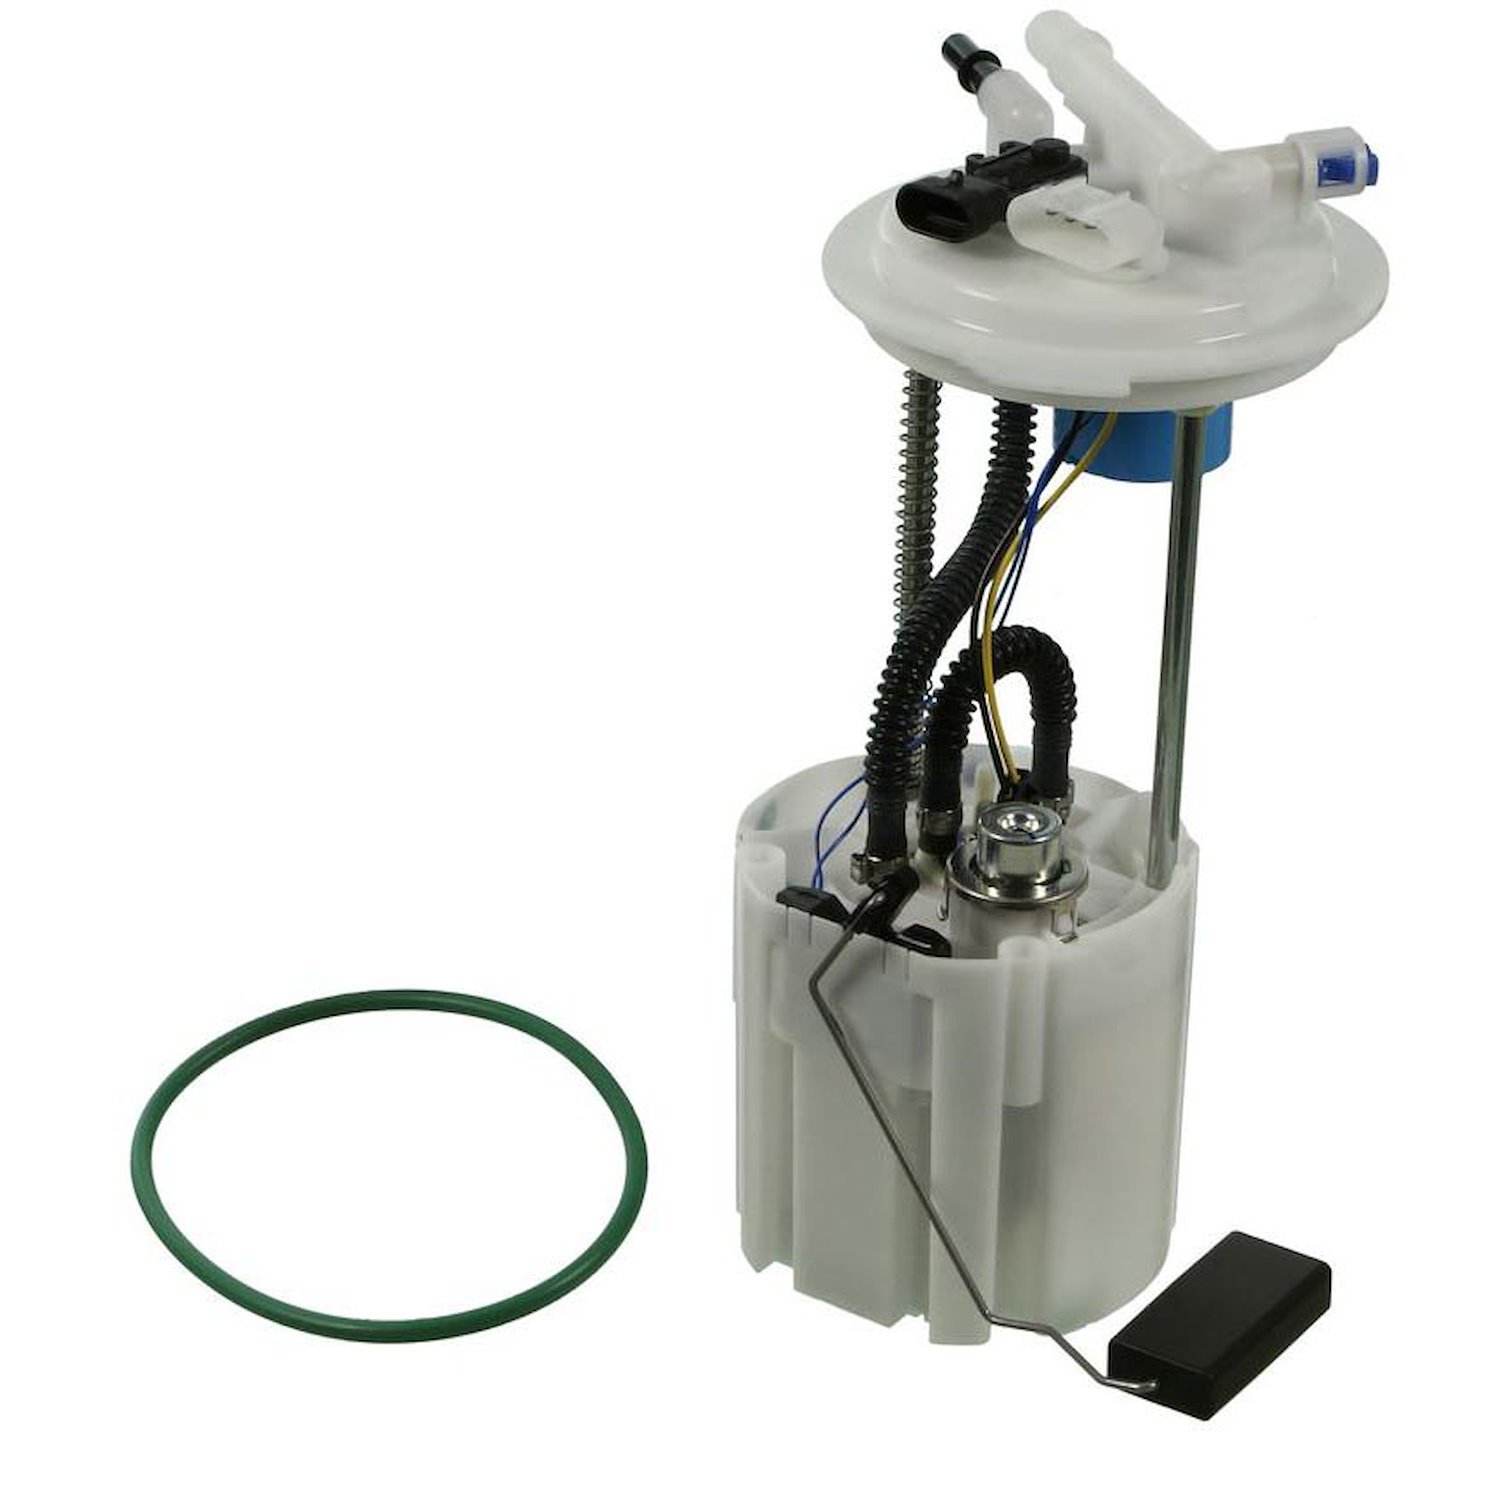 OE GM Replacement Fuel Pump Module Assembly for 2006-2007 Pontiac Solstice/2007 Saturn Sky